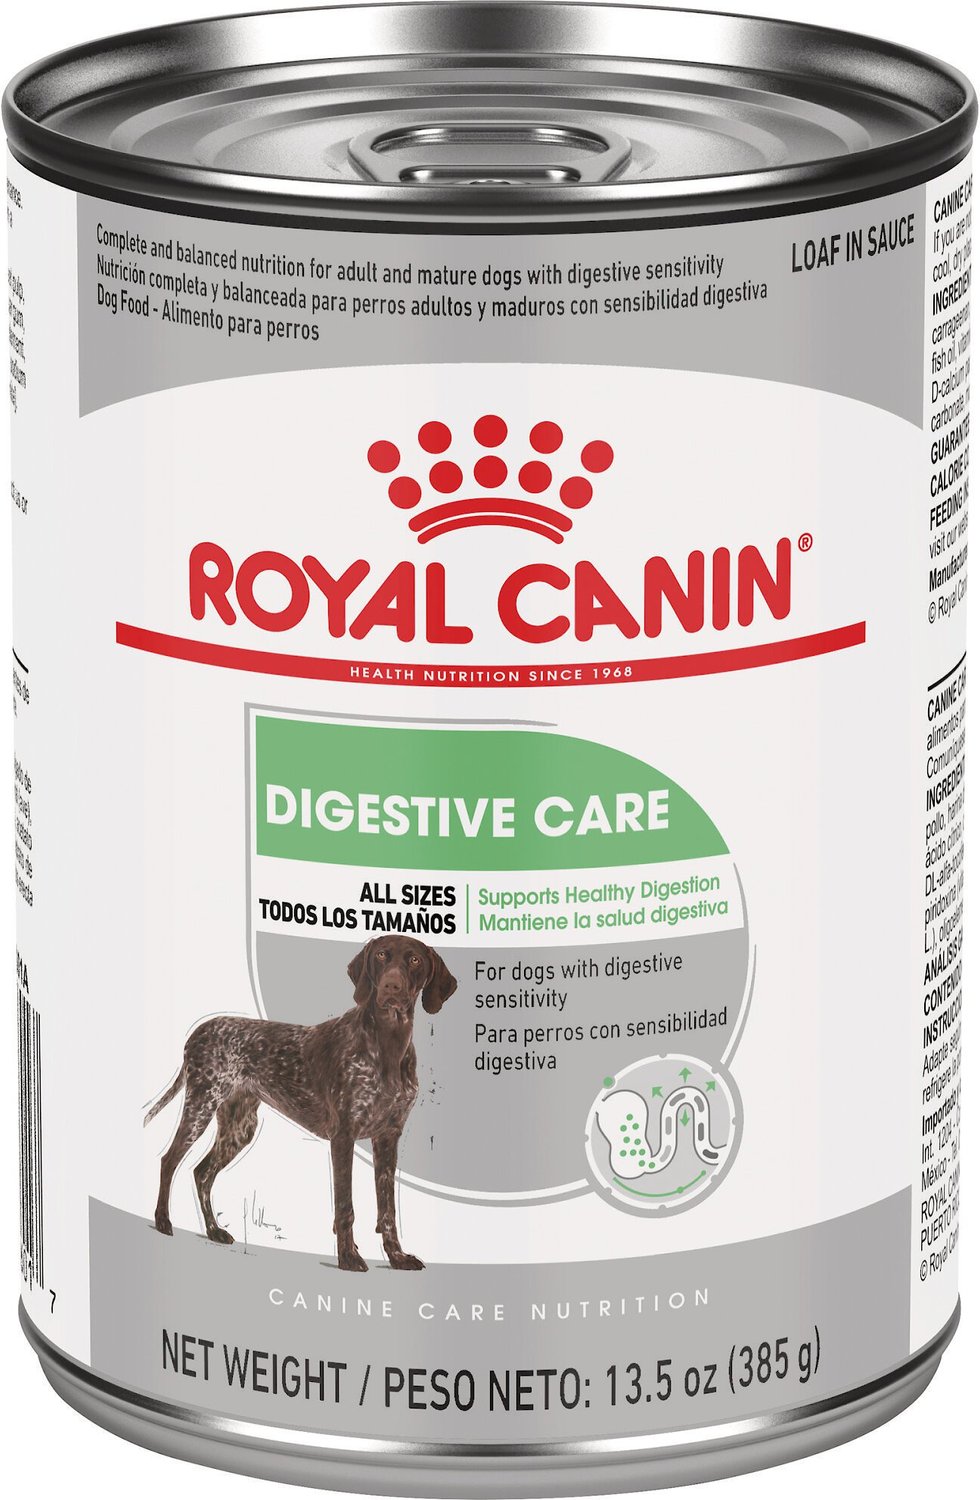 Royal Canin Canine Care Nutrition Digestive Care Loaf in Sauce